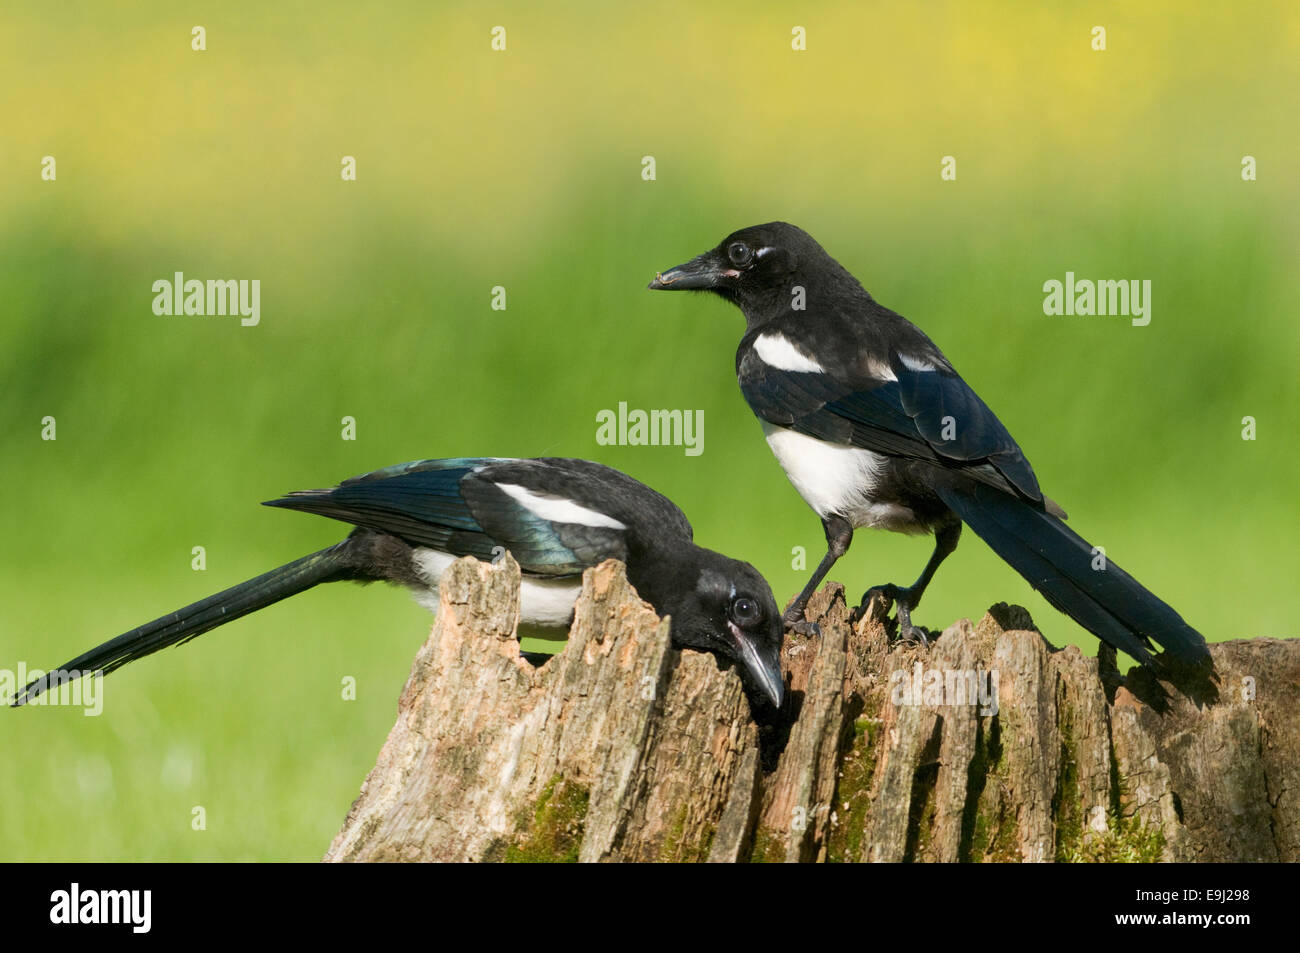 European Magpies (pica pica) perched on a rotten tree stump covered in moss Stock Photo